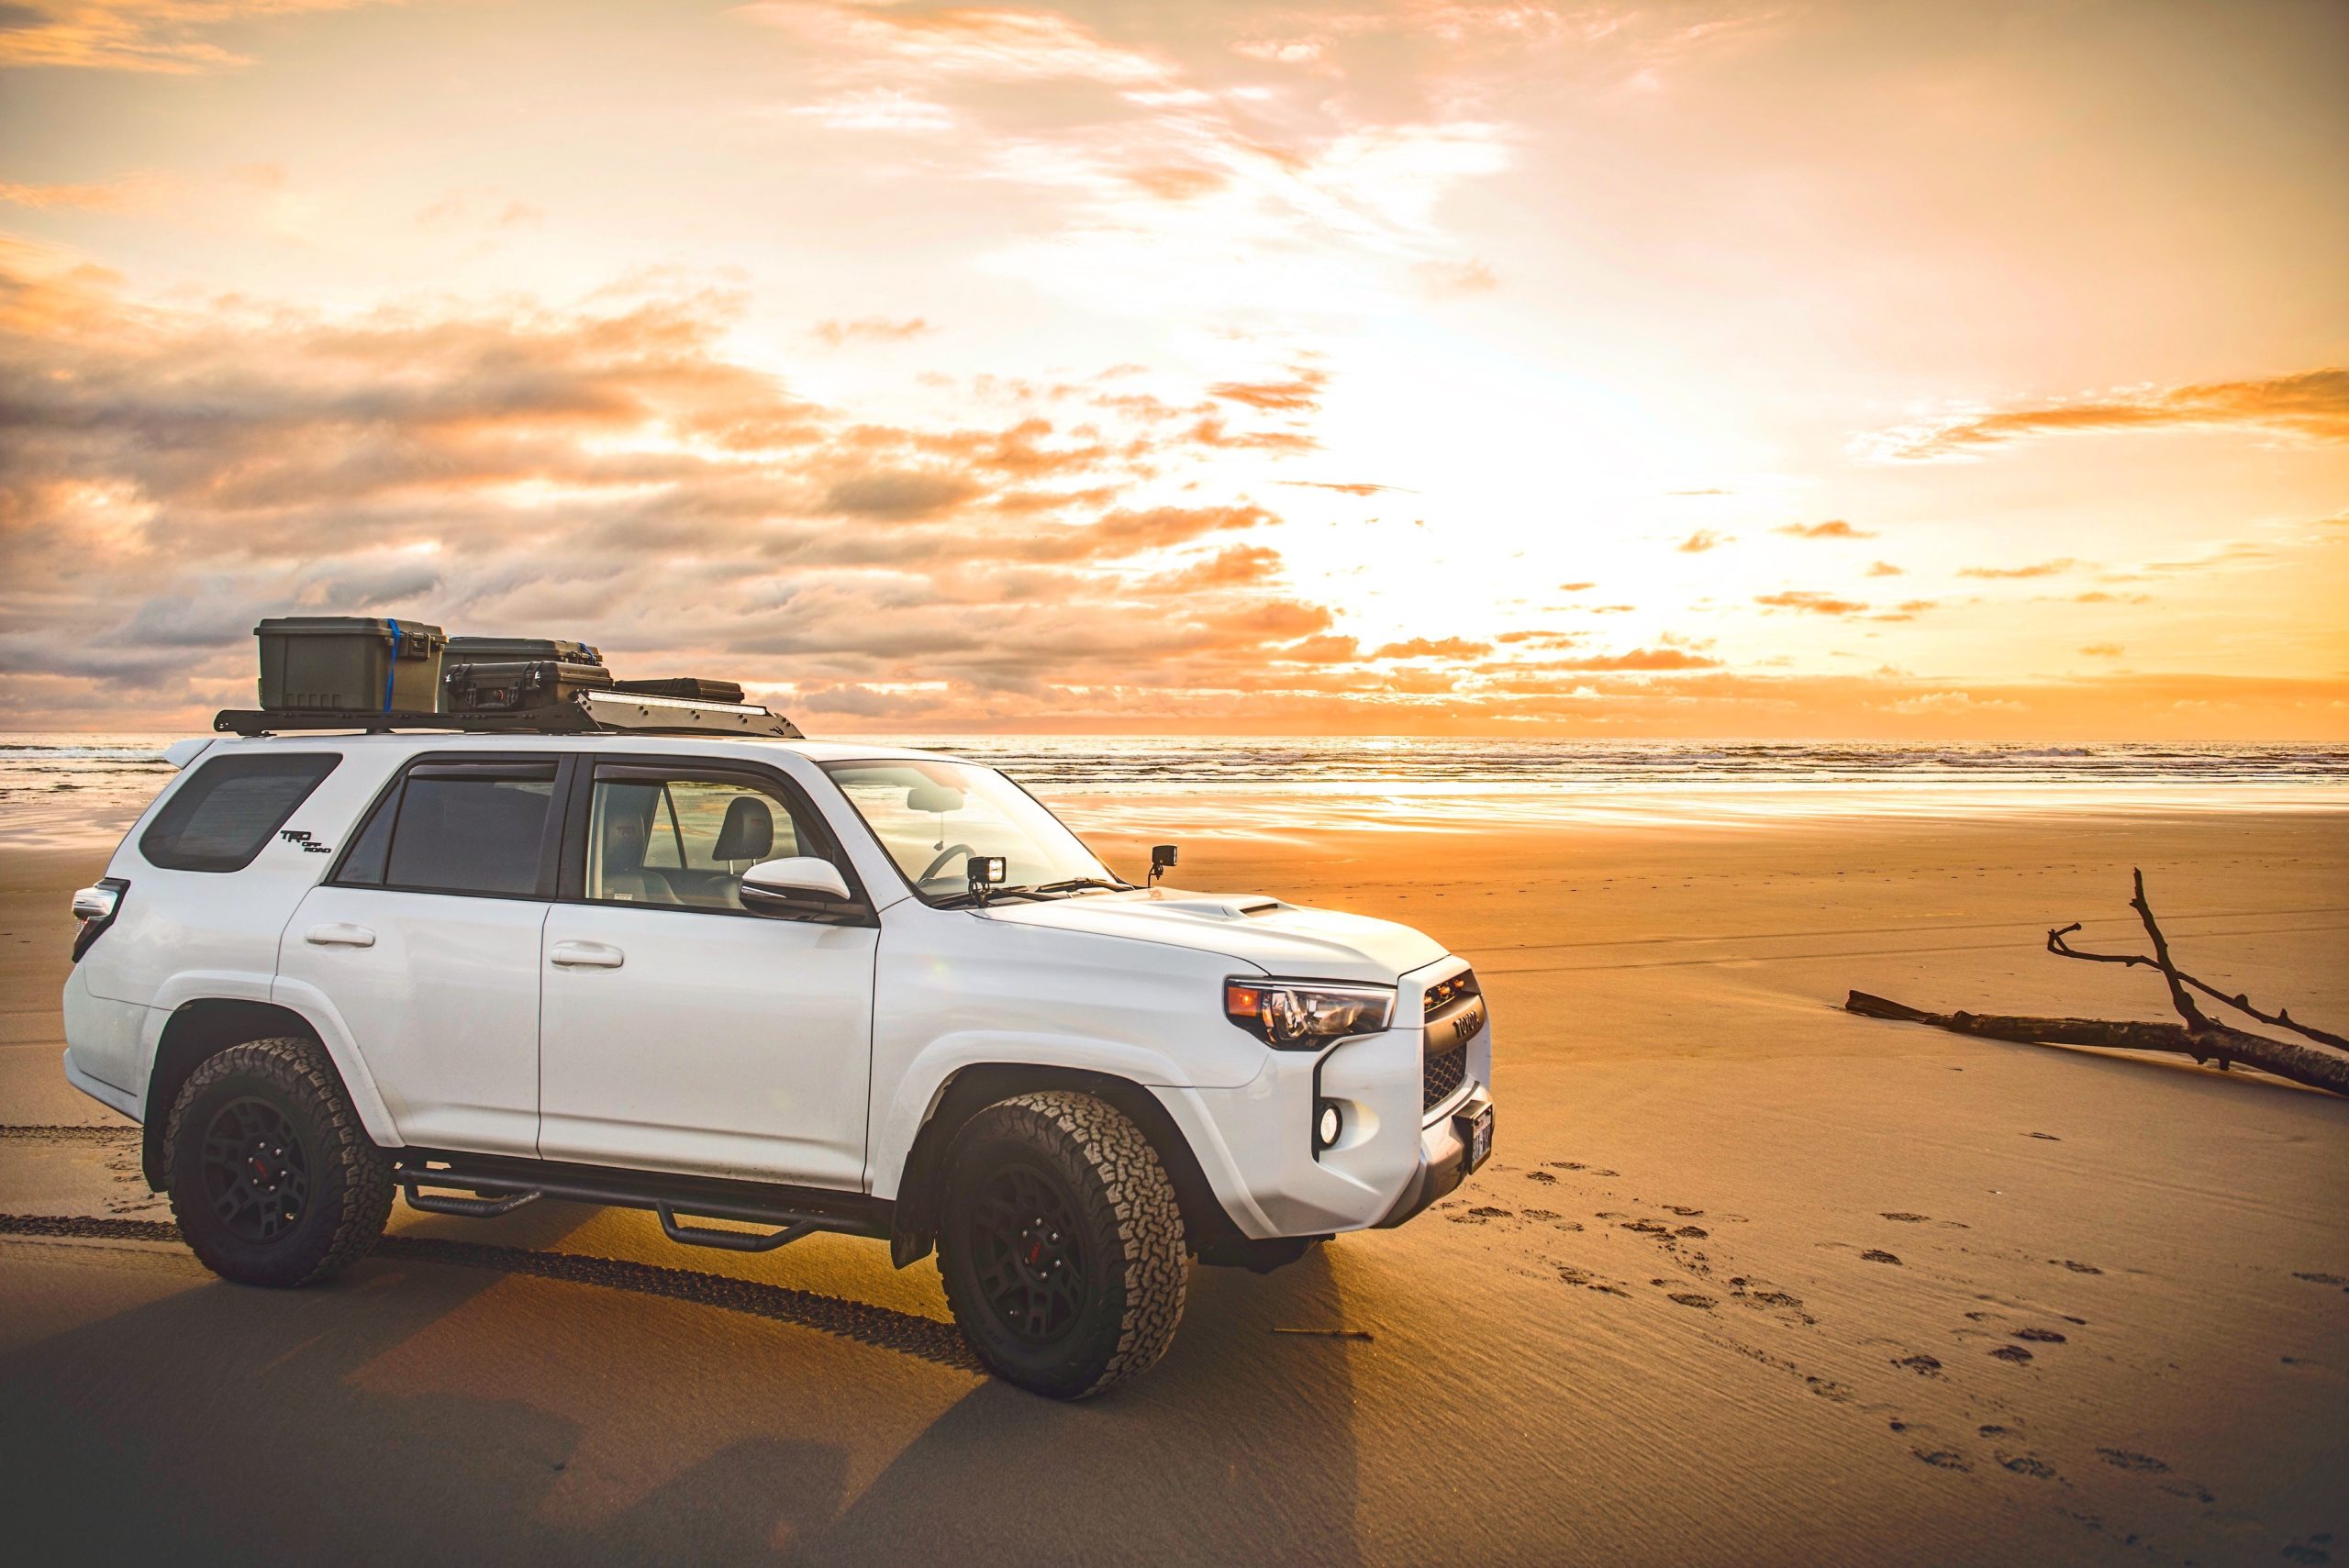 An SUV with a roof rack is parked on a beach at sunset.